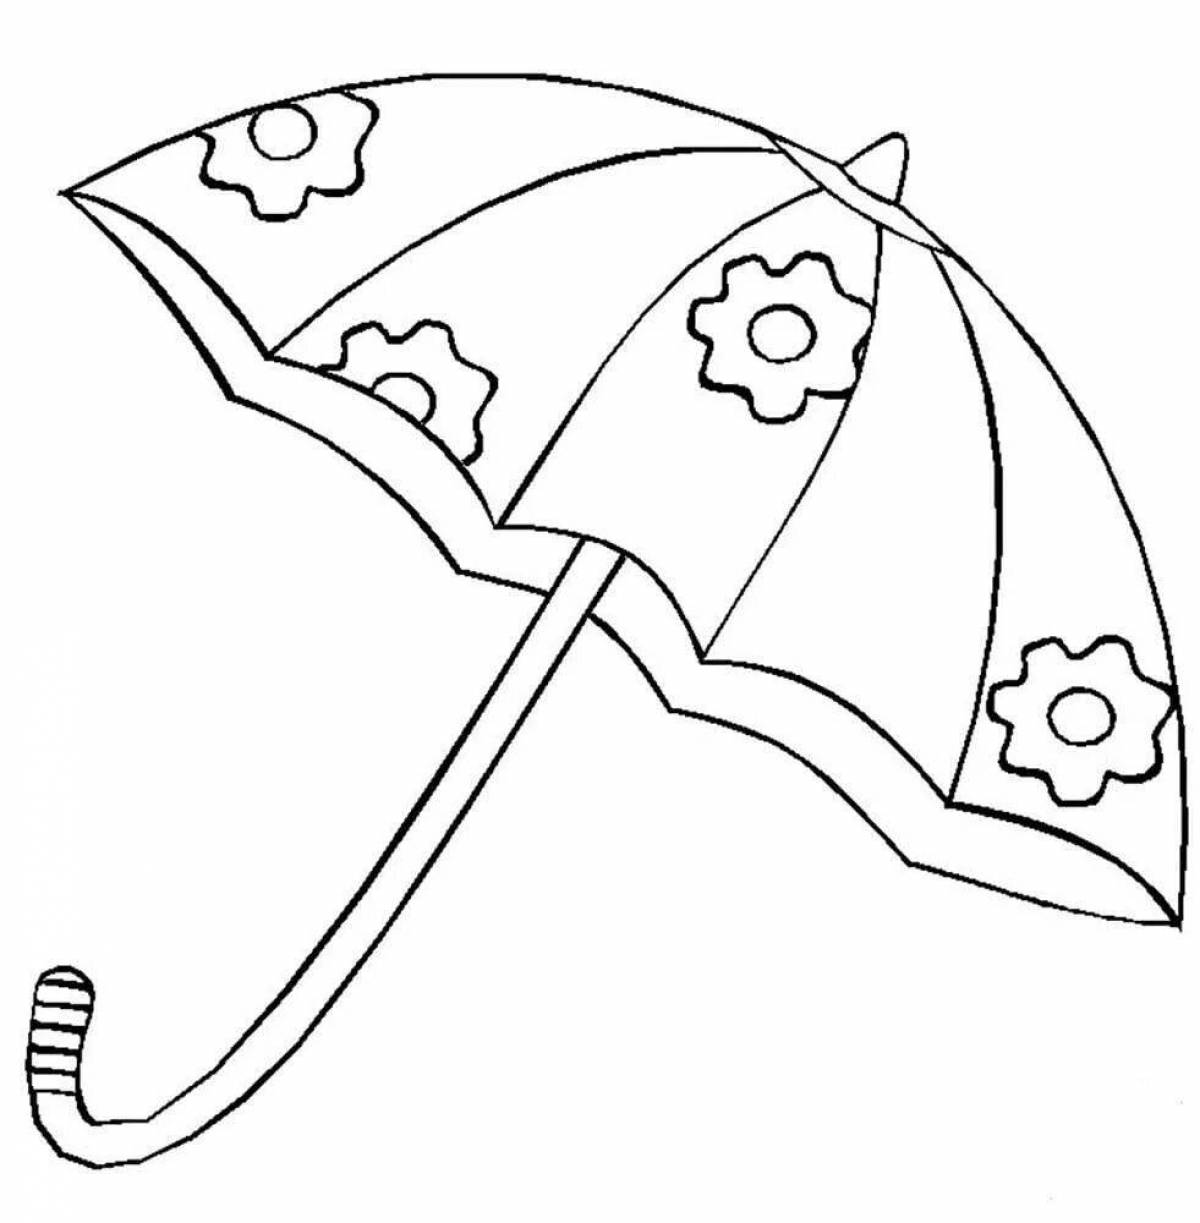 Colorful umbrella coloring book for children 3-4 years old